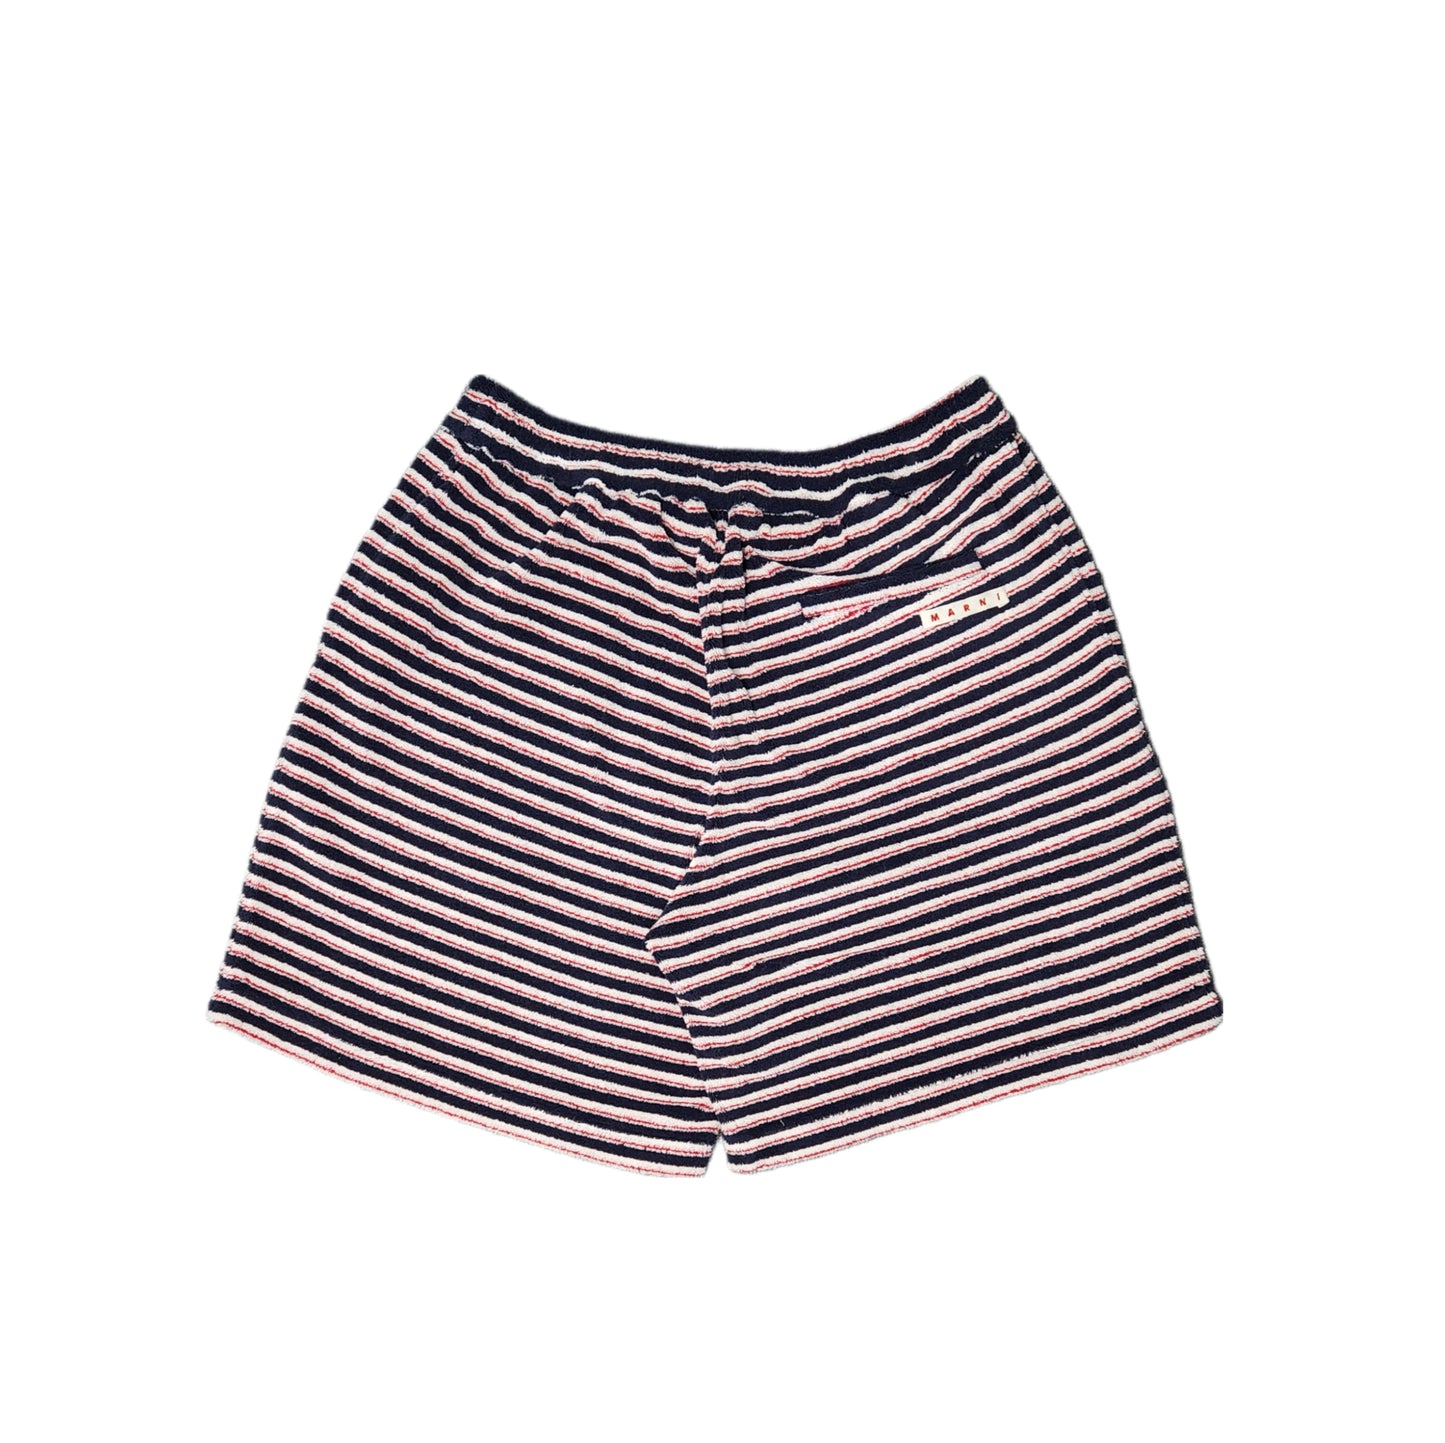 RED AND BLUE STRIPED TERRY SHORT PANTS